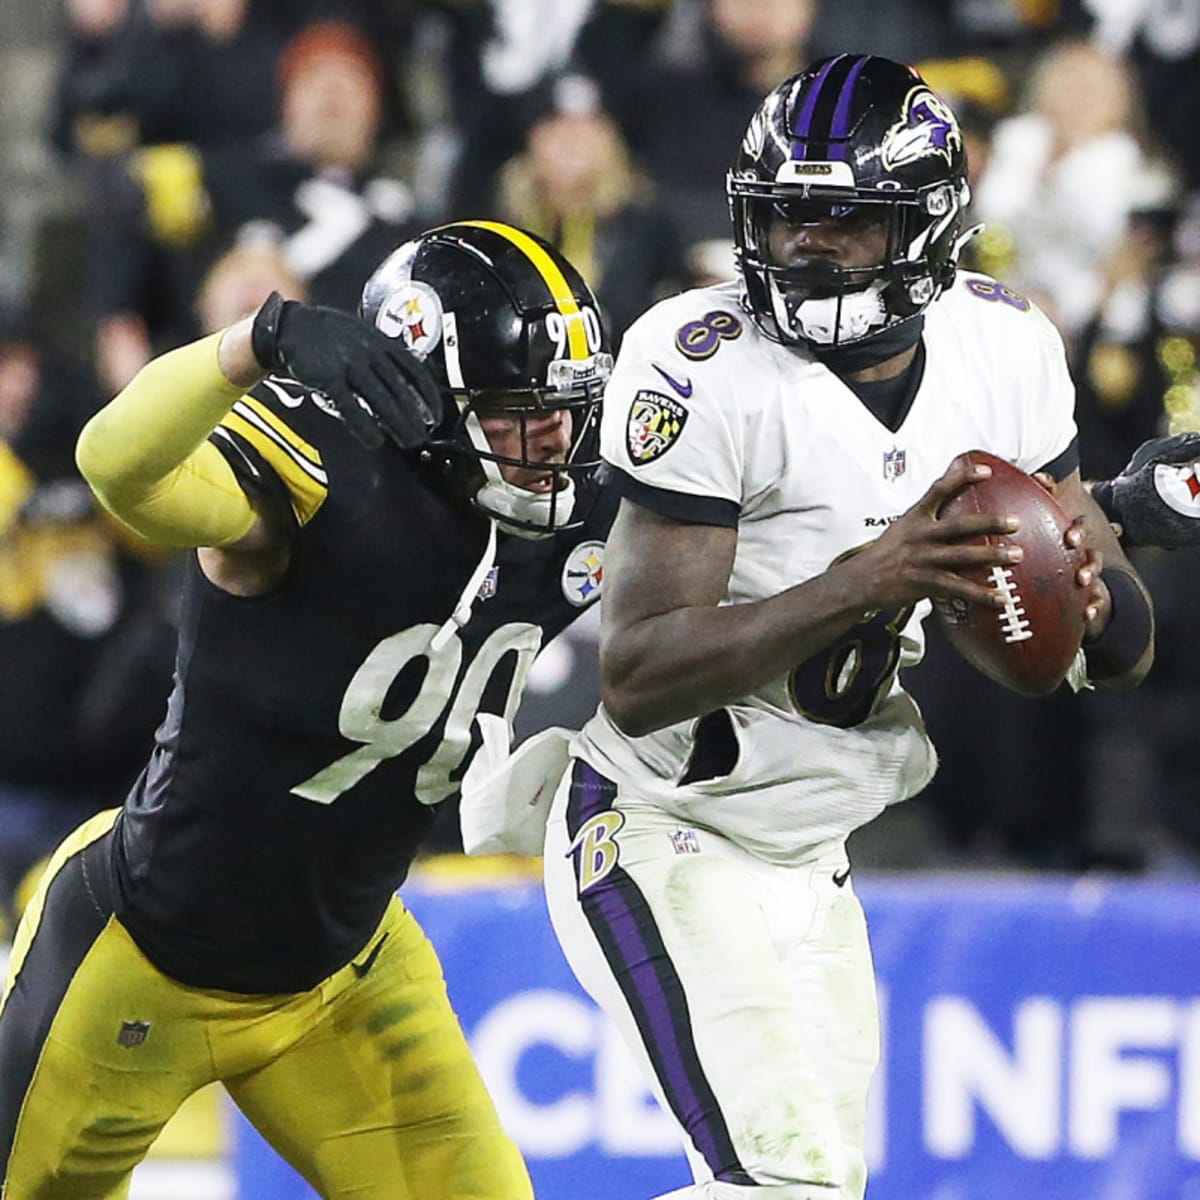 Ravens vs. Steelers: How to watch, listen, and stream